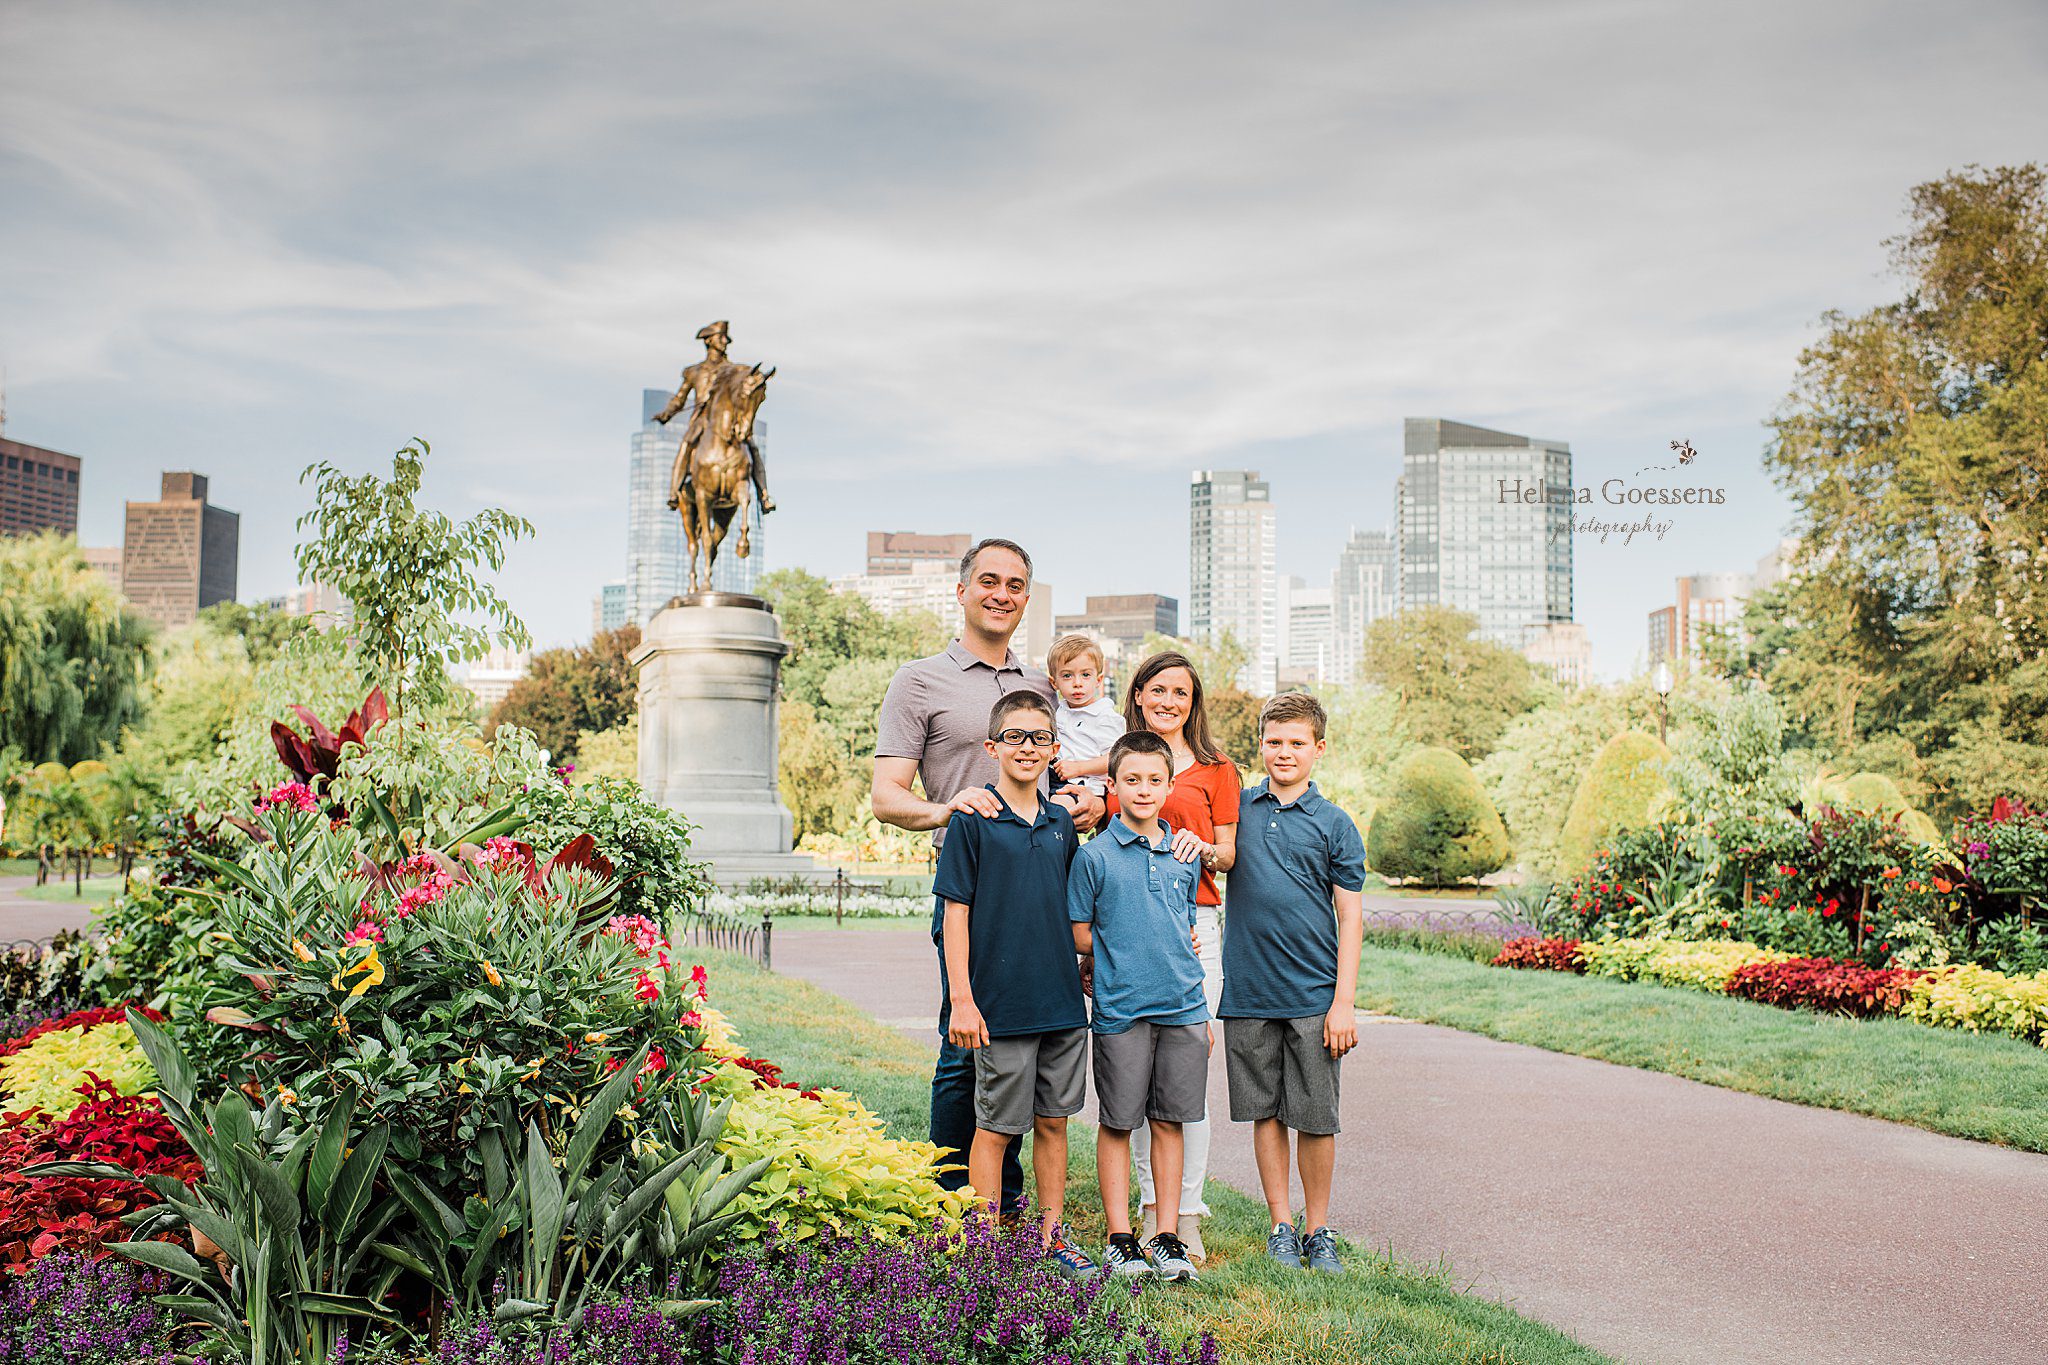 family of 6 poses in Boston Public Garden with Helena Goessens Photography